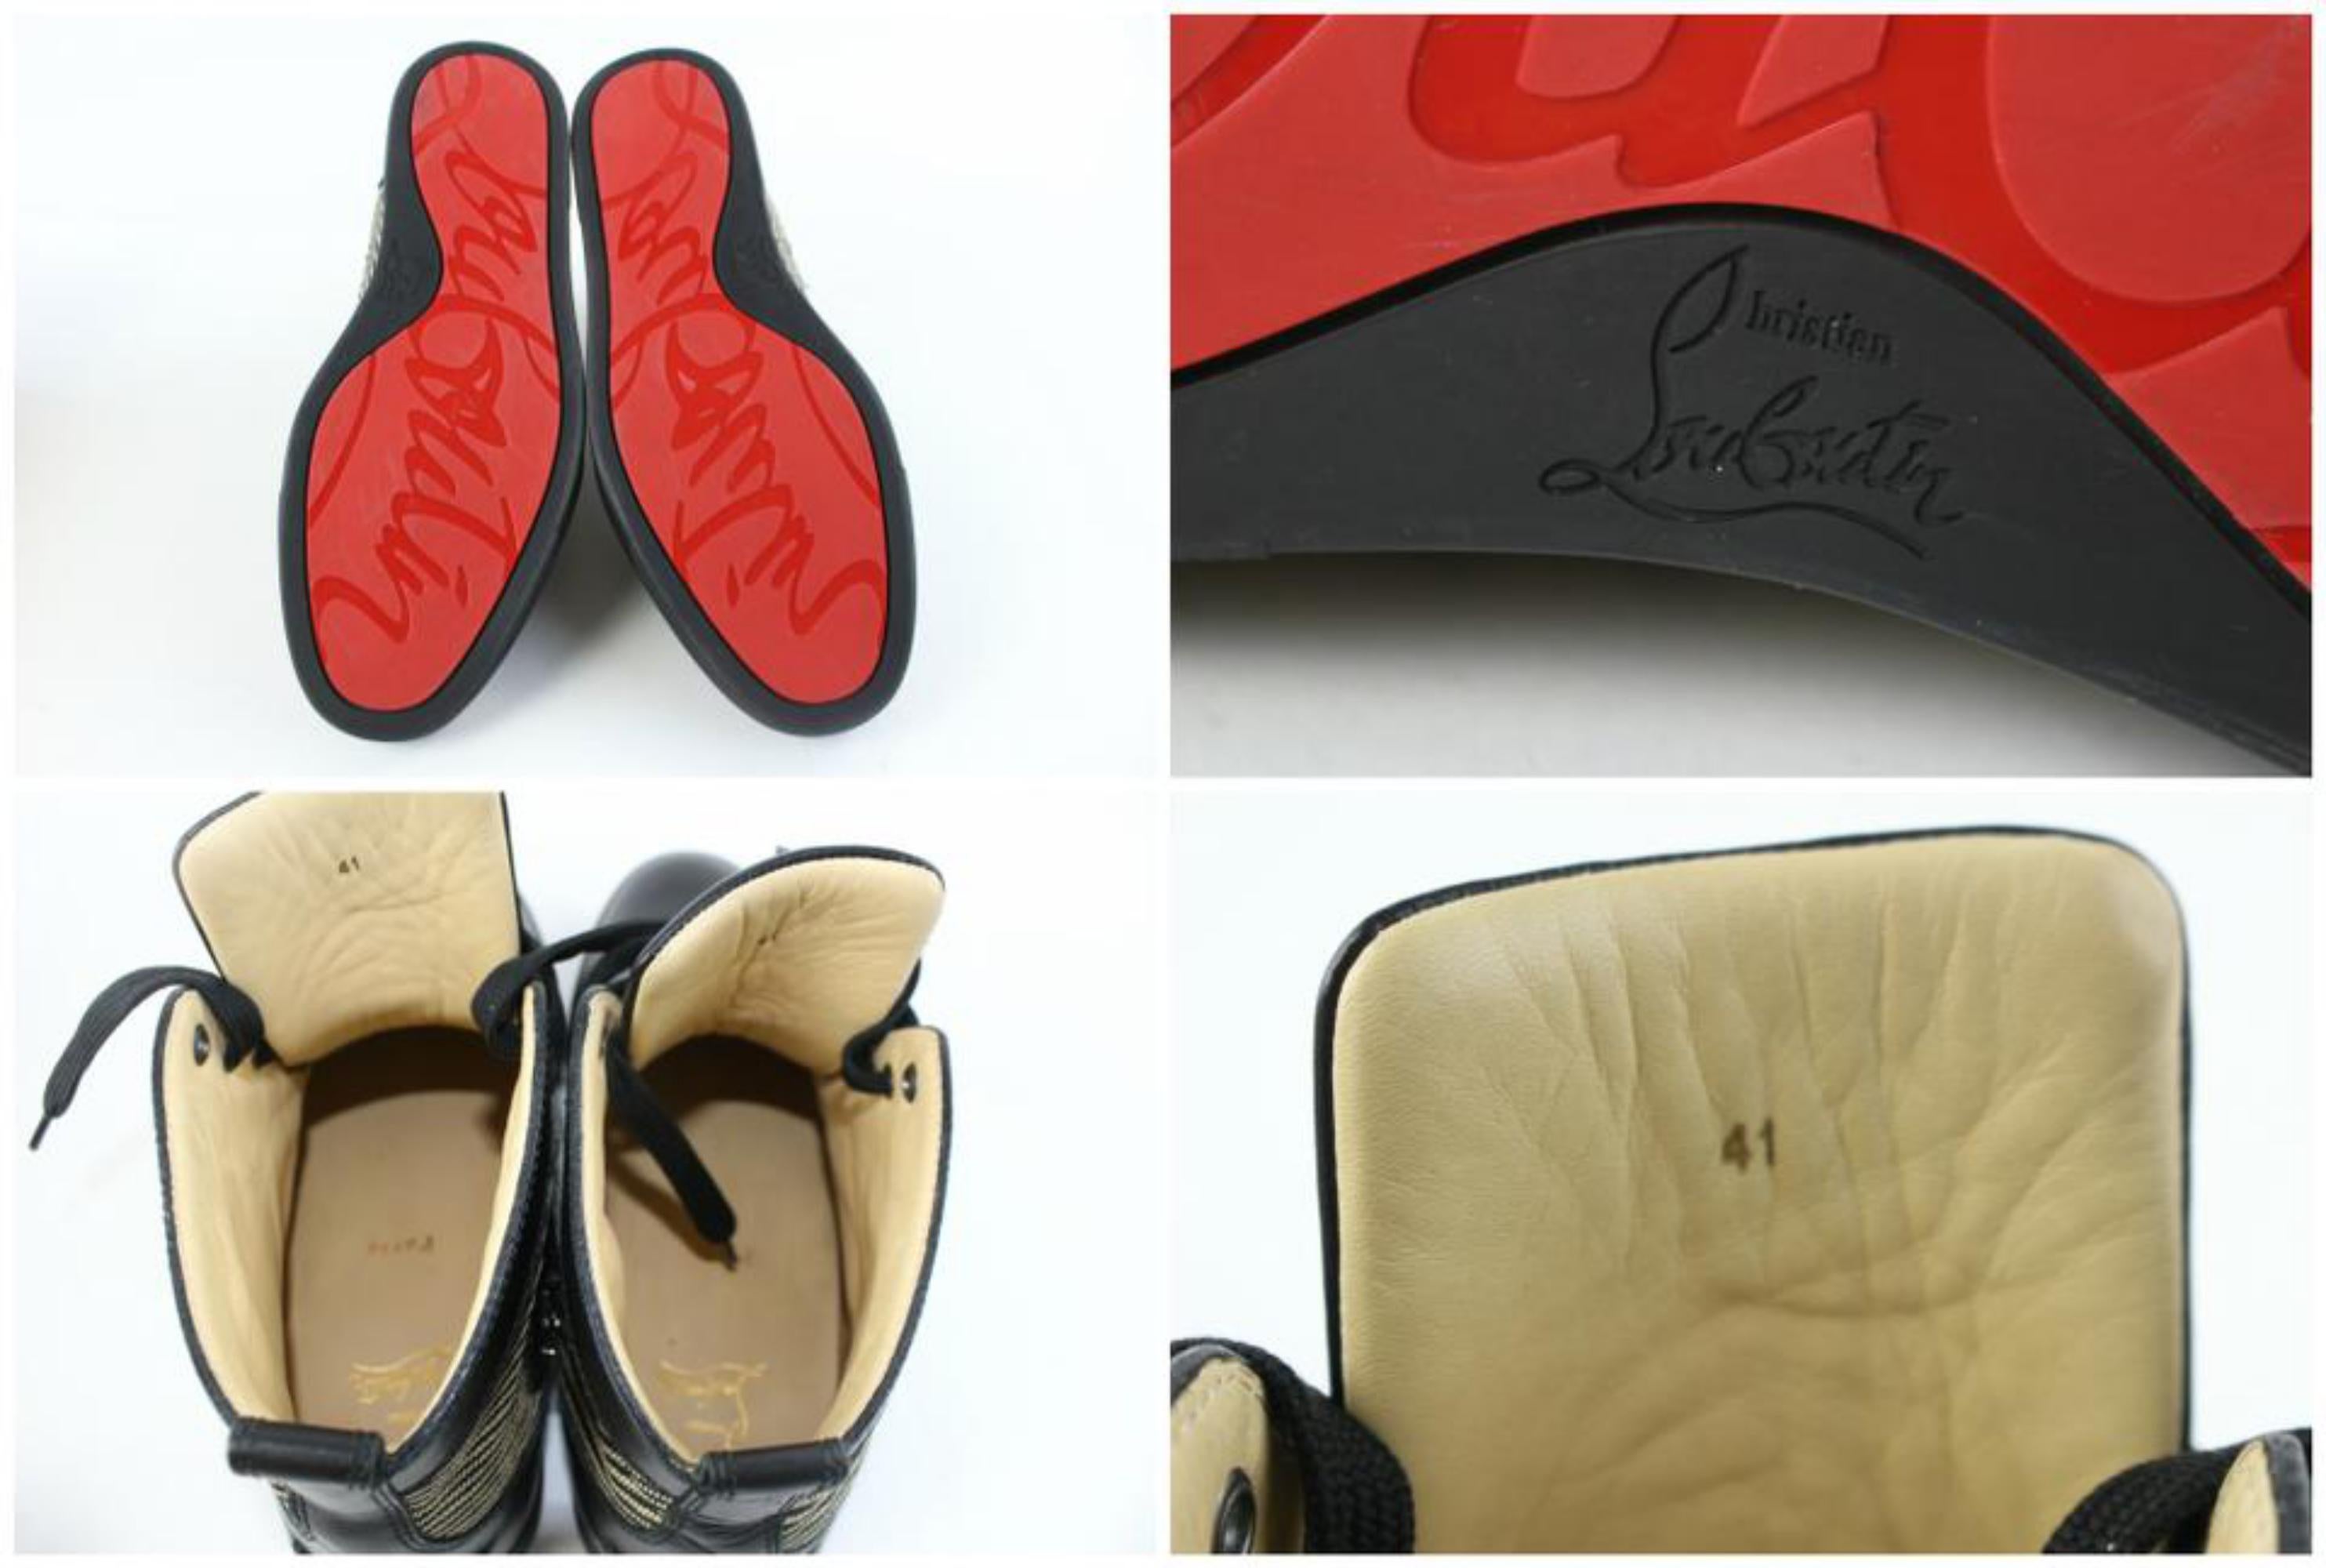 Christian Louboutin Black Bio Bio Lux Calf Flat 18clz0802 Sneakers In Excellent Condition For Sale In Forest Hills, NY